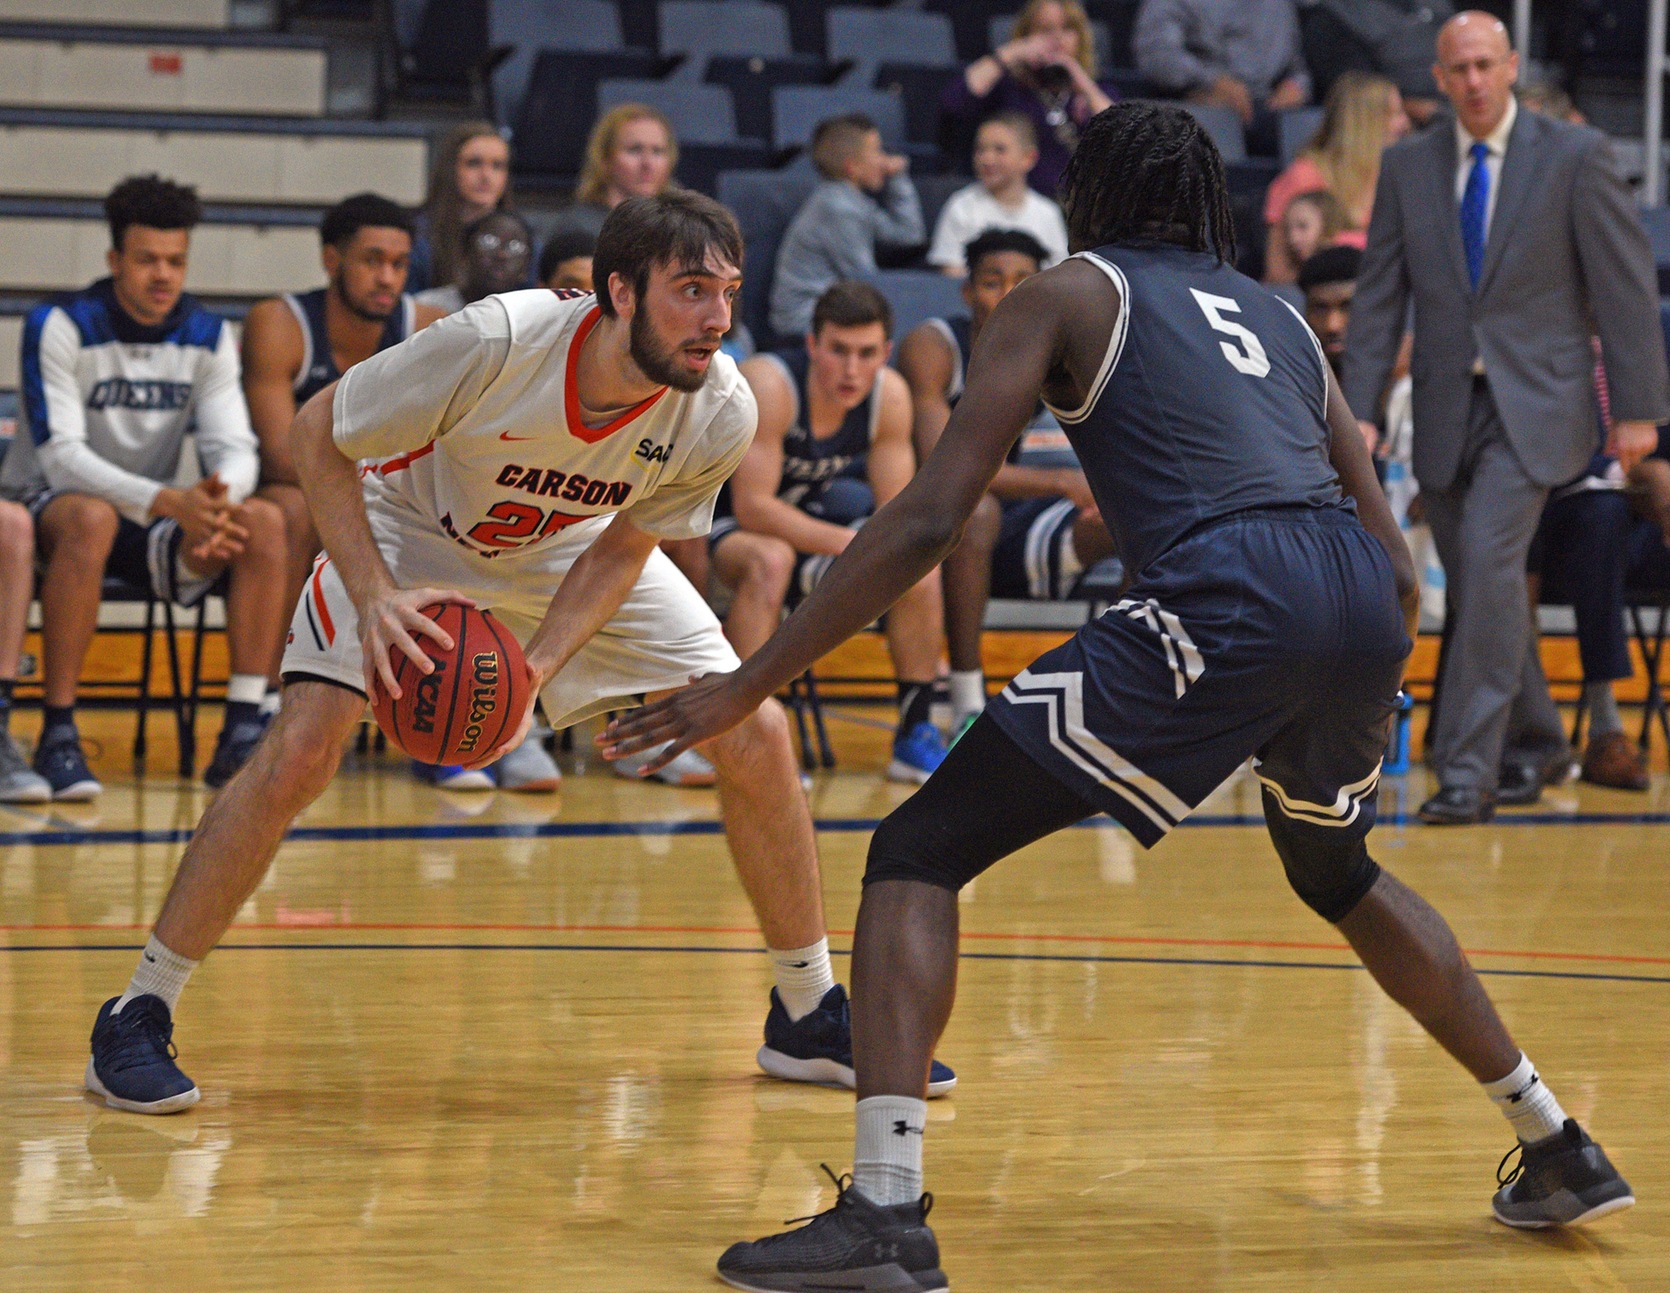 Top-seeded, ninth-ranked Queens awaits Carson-Newman in opening round of Pilot/Flying J SAC Basketball Tournament